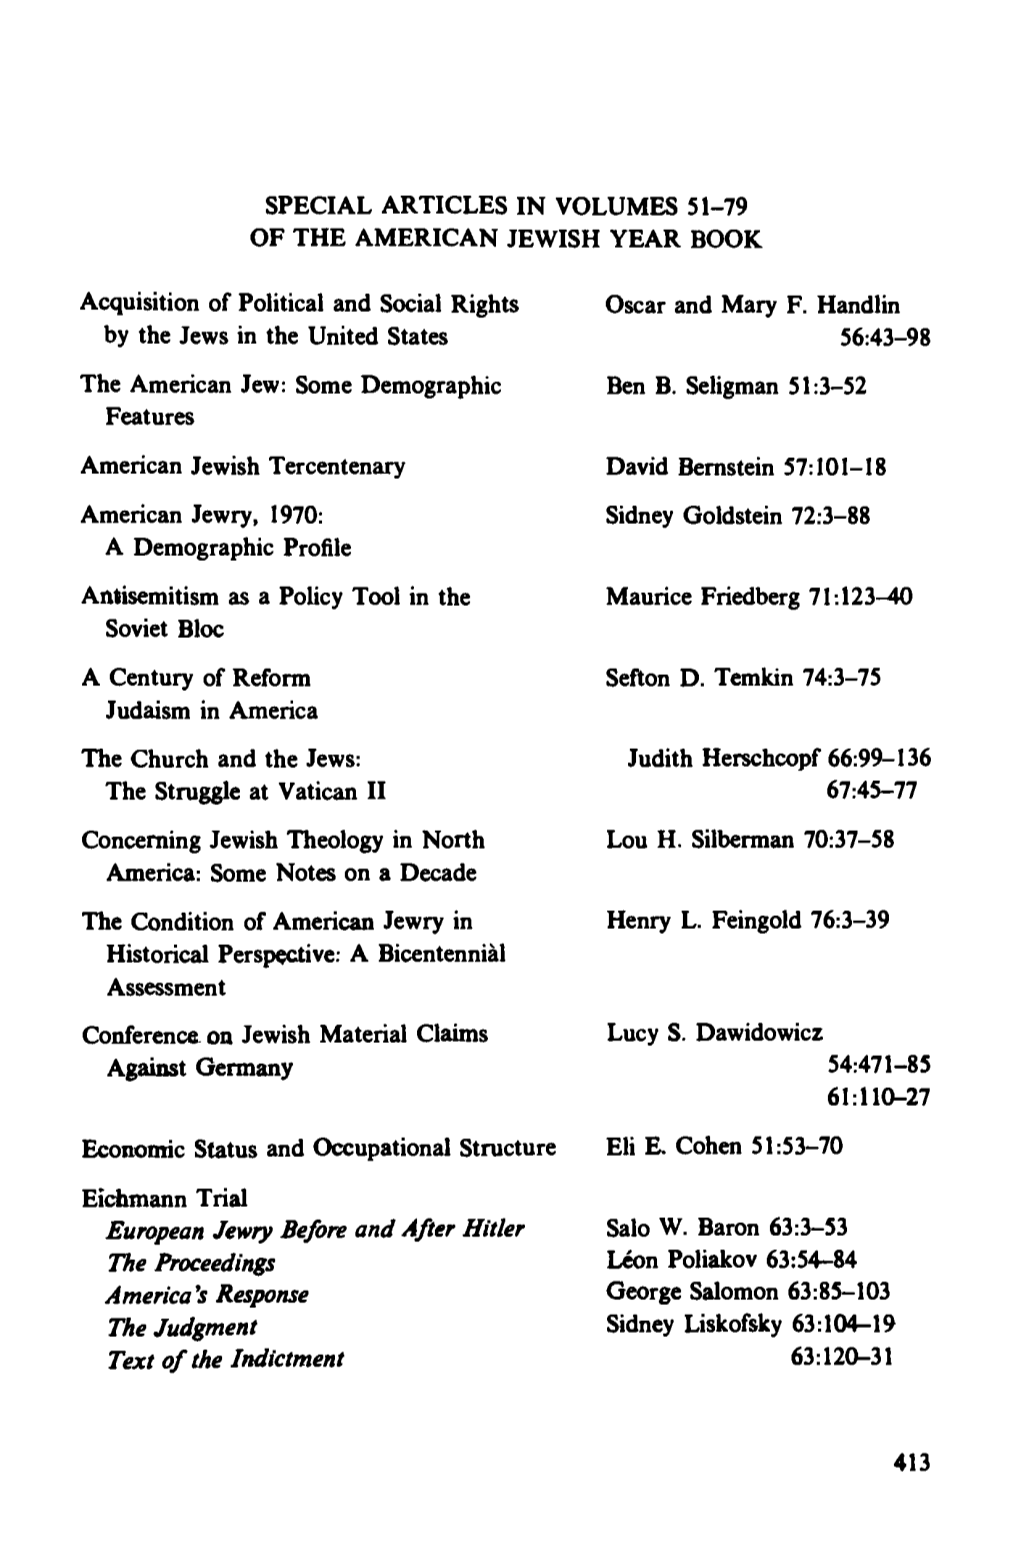 Special Articles in Volumes 51-79 of the American Jewish Year Book